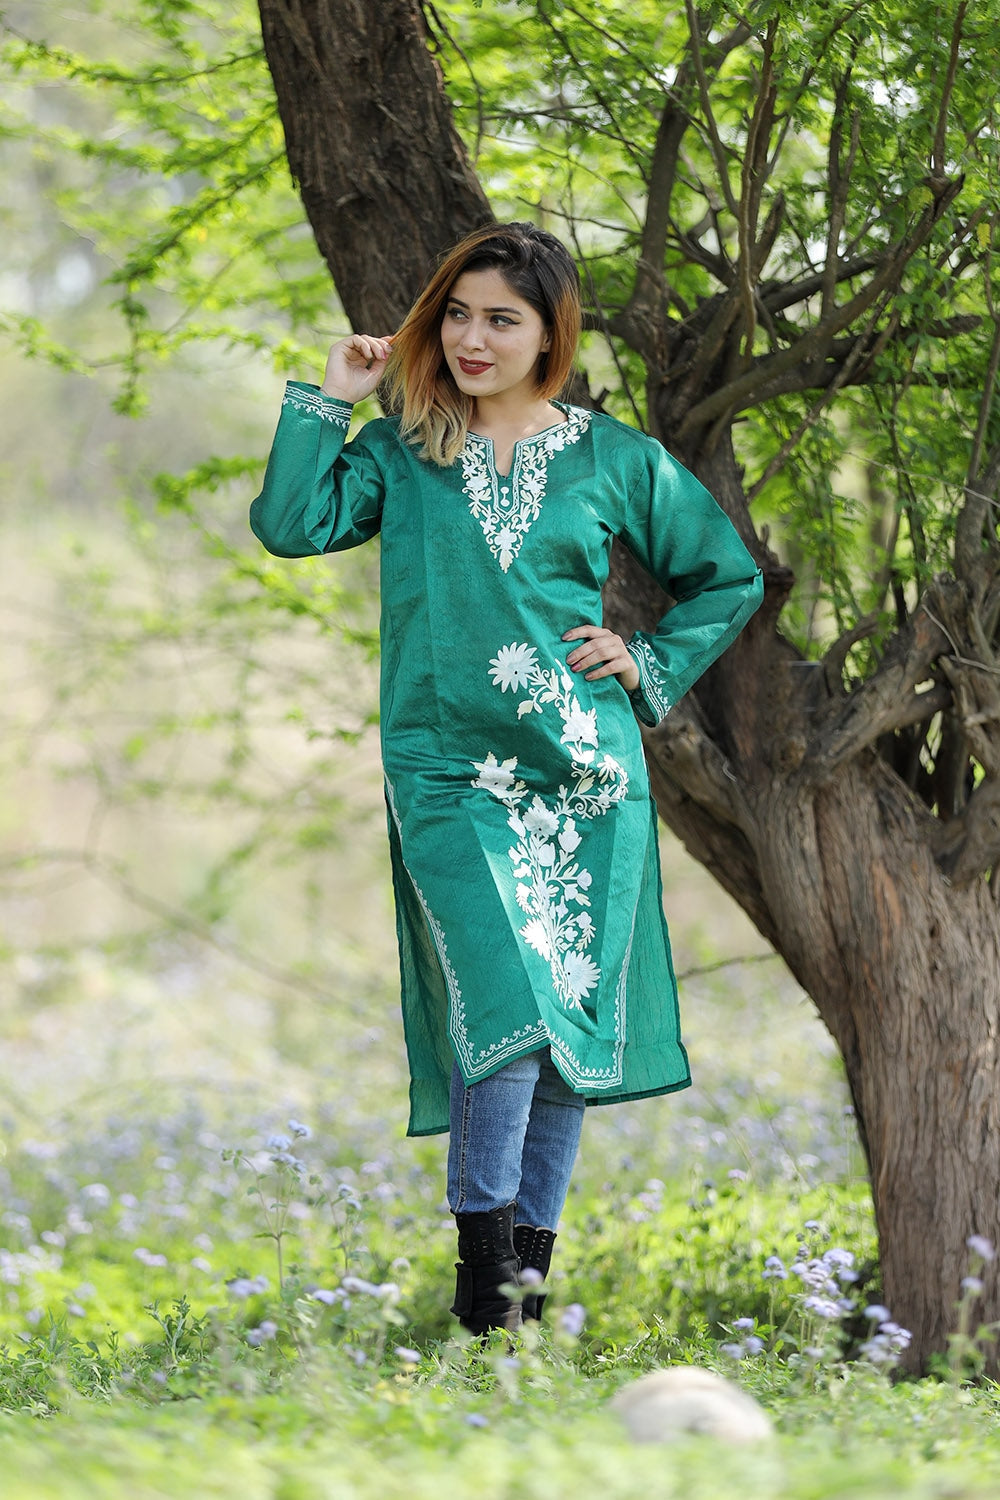 Buy Semi Stitched Collar V Neck Indian Kurti Tunic Online for Women in USA